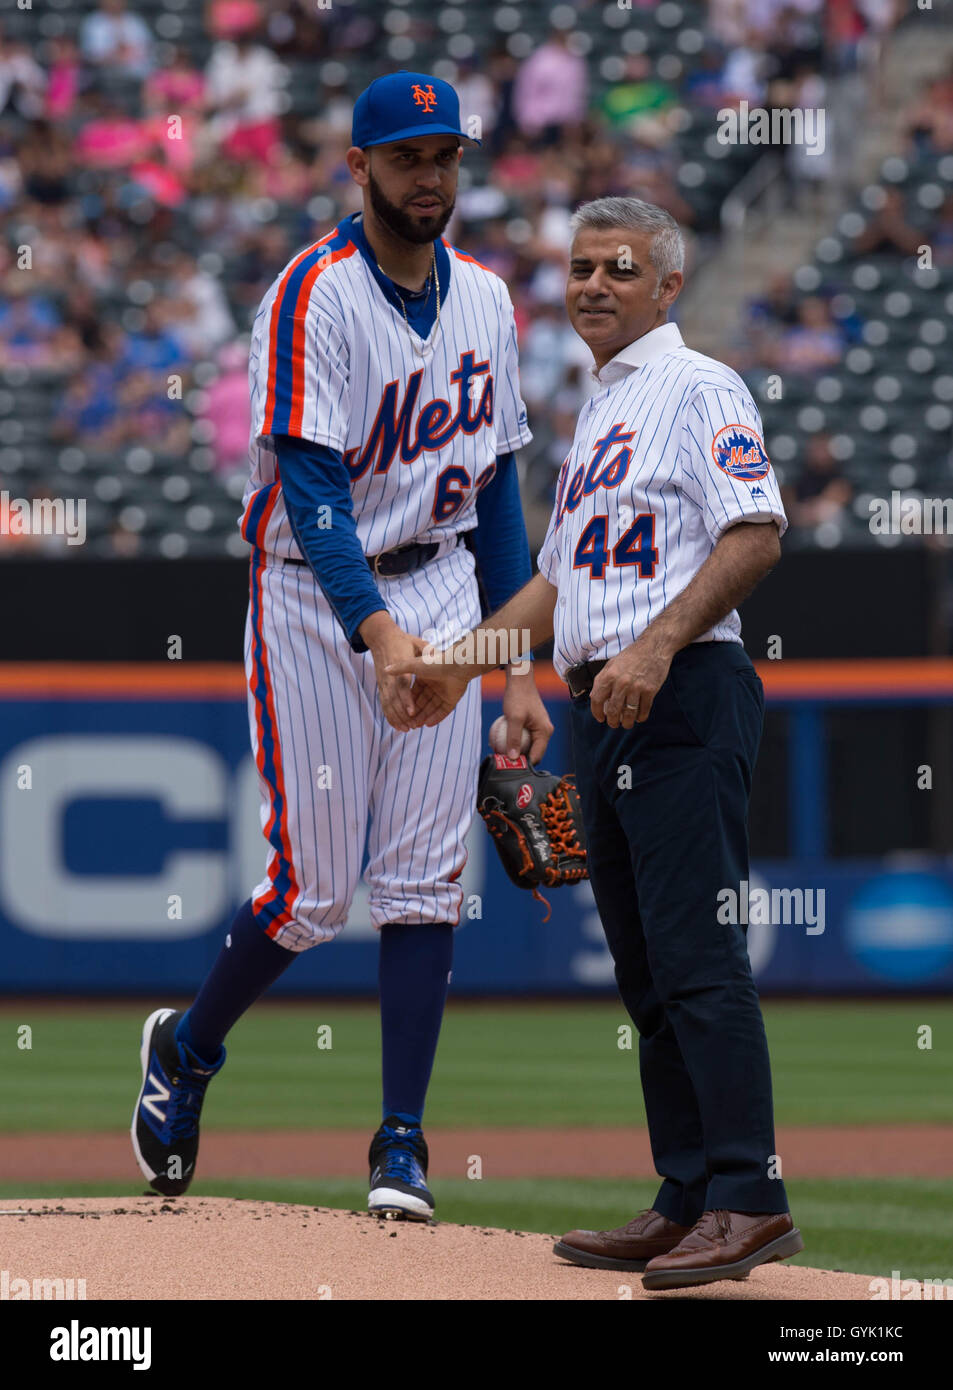 Mayor of London Sadiq Khan pitches the first ball at a baseball game between New York Mets and Minnesota Twins at Citi Field in New York City, during a three day visit to the US capital as part of his visit to North America, where he is due to meet NYC Mayor Bill de Blasio. Stock Photo